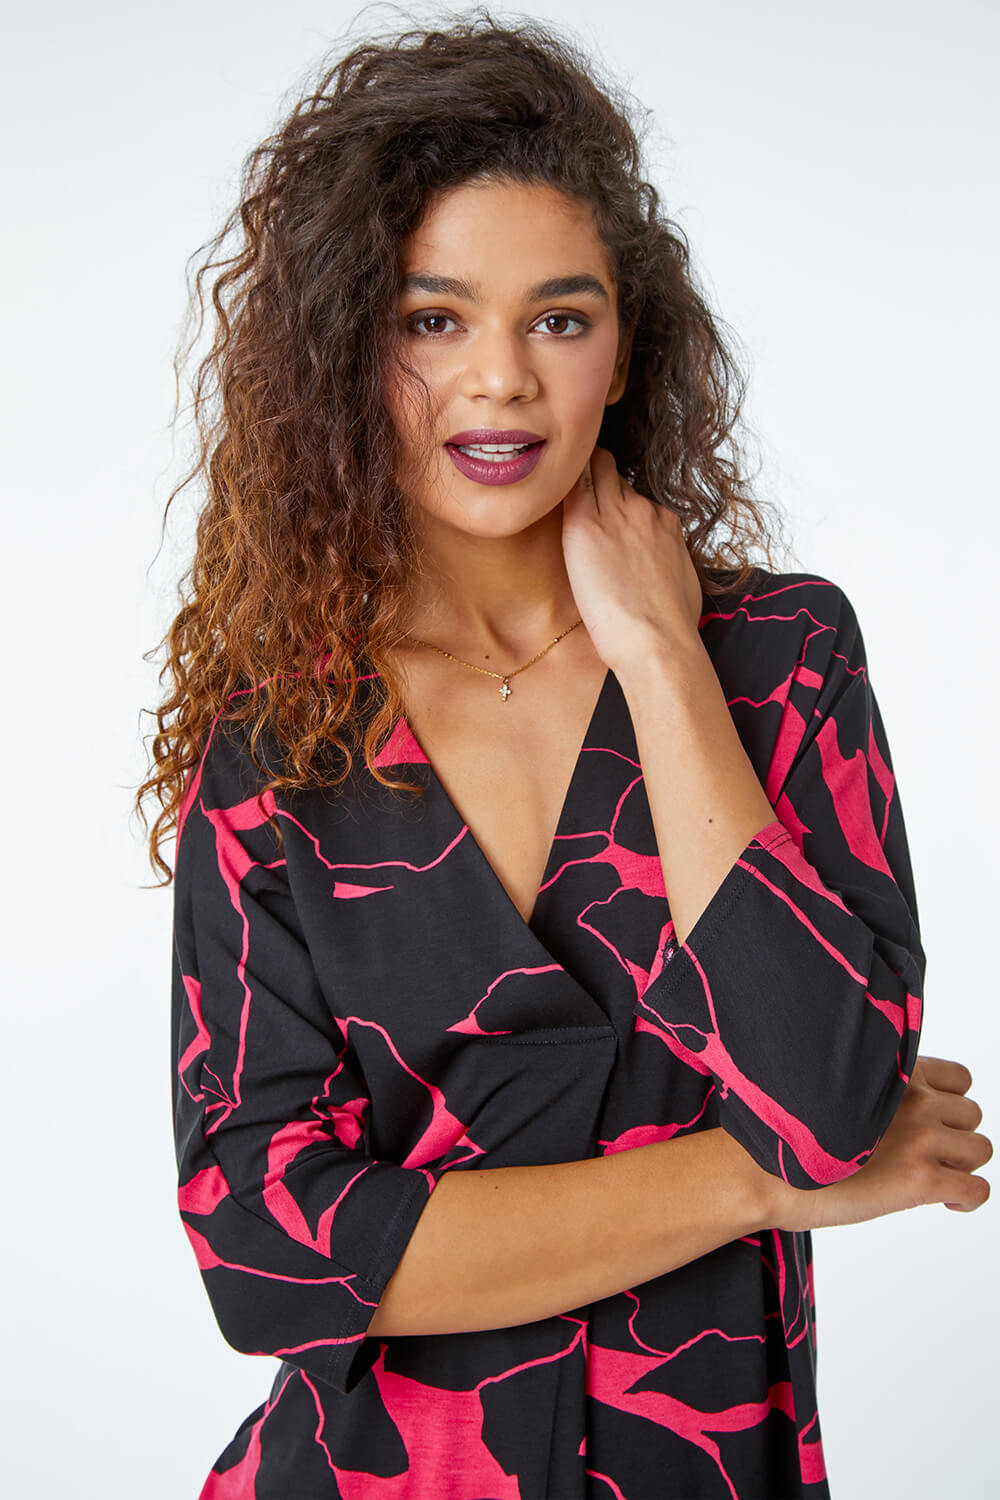 CERISE Floral Print Pleat Front Top, Image 4 of 5